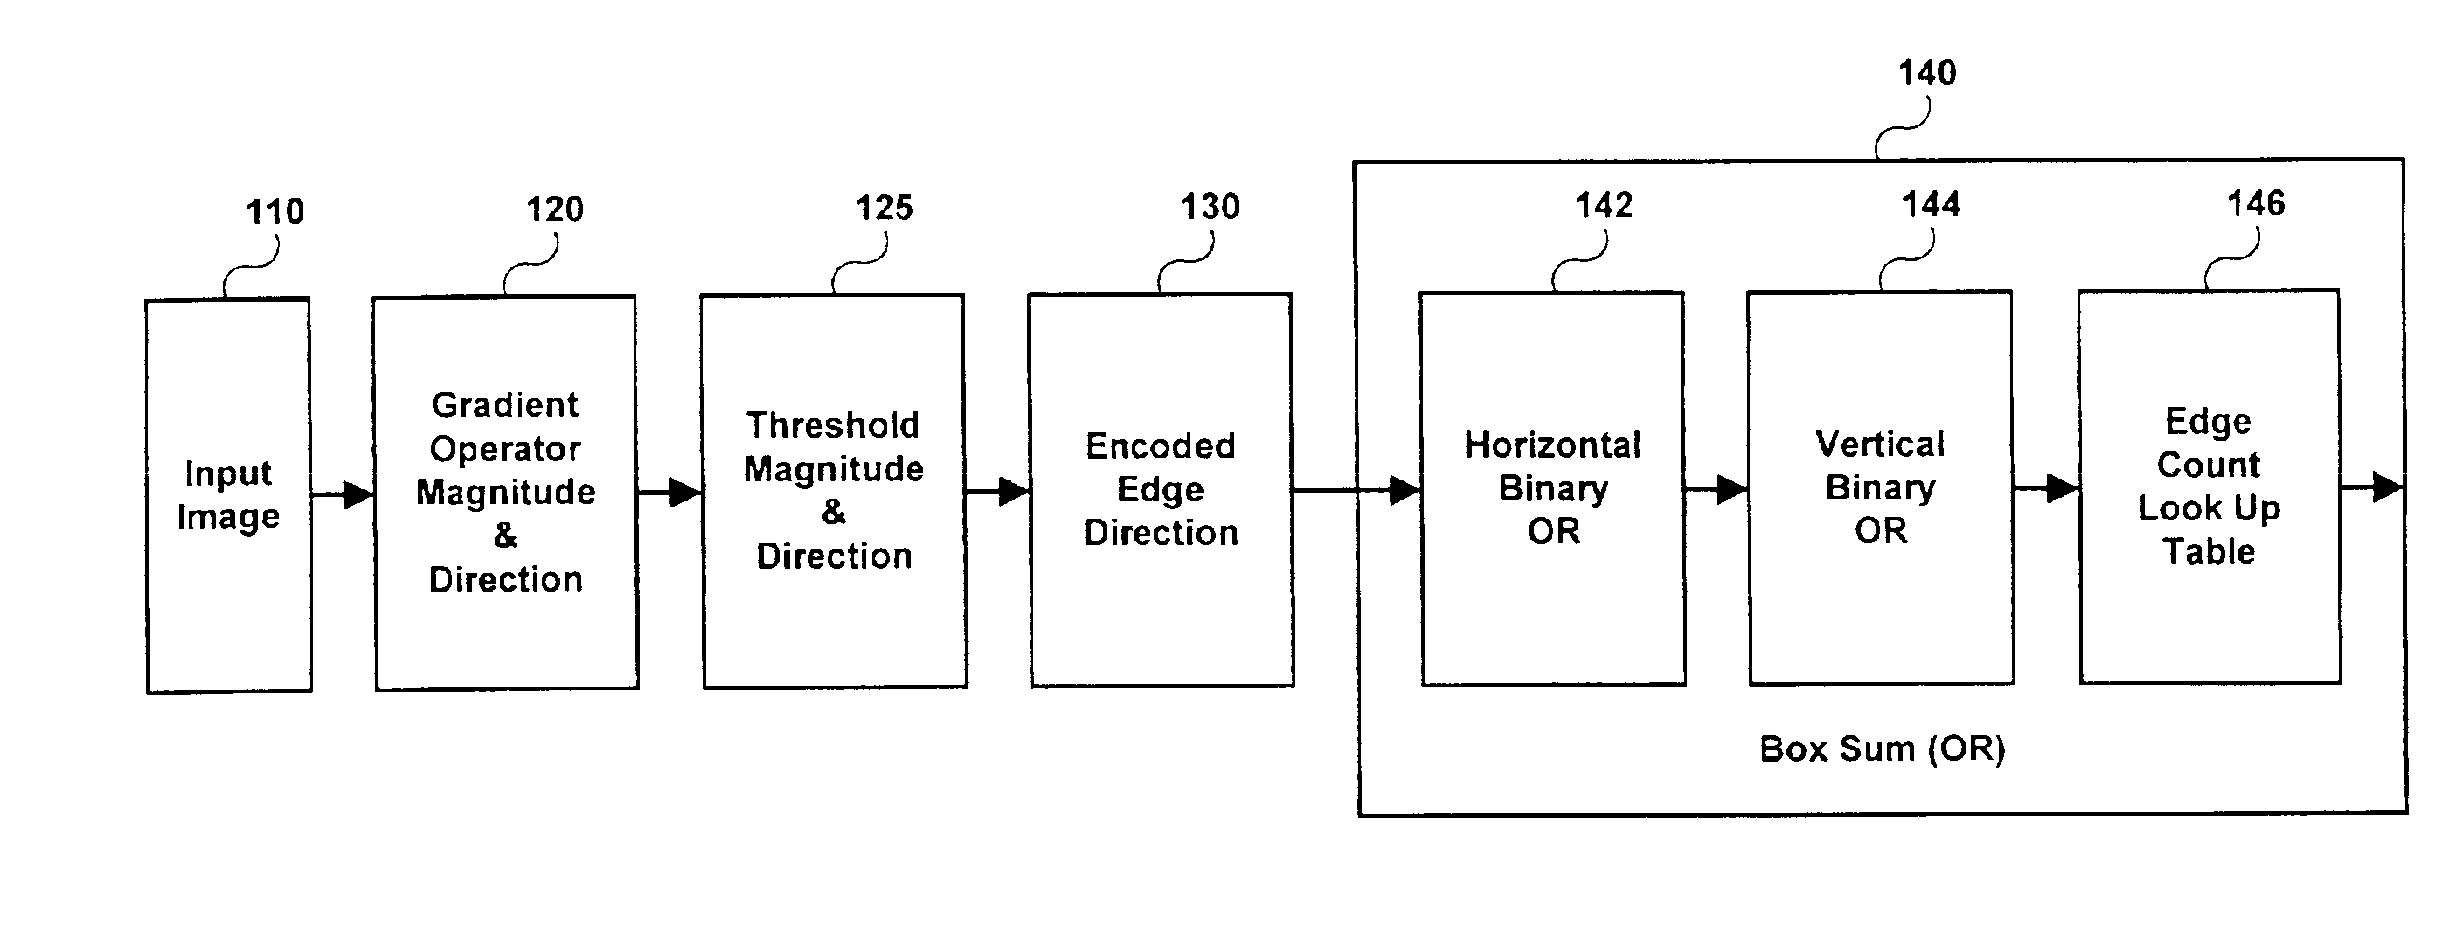 Method and system for identifying objects in an image